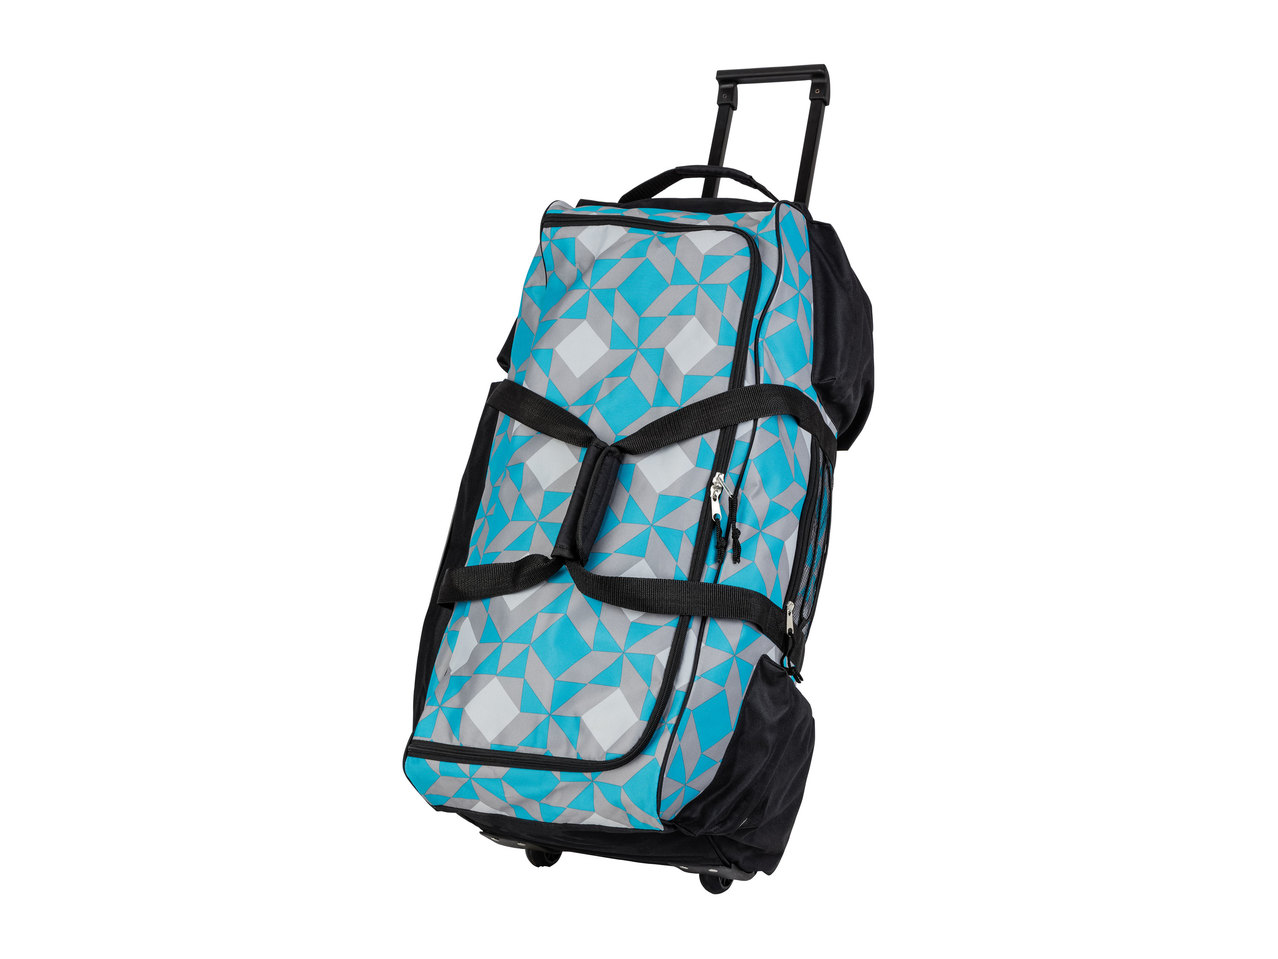 Top Move Trolley Travel Bag1